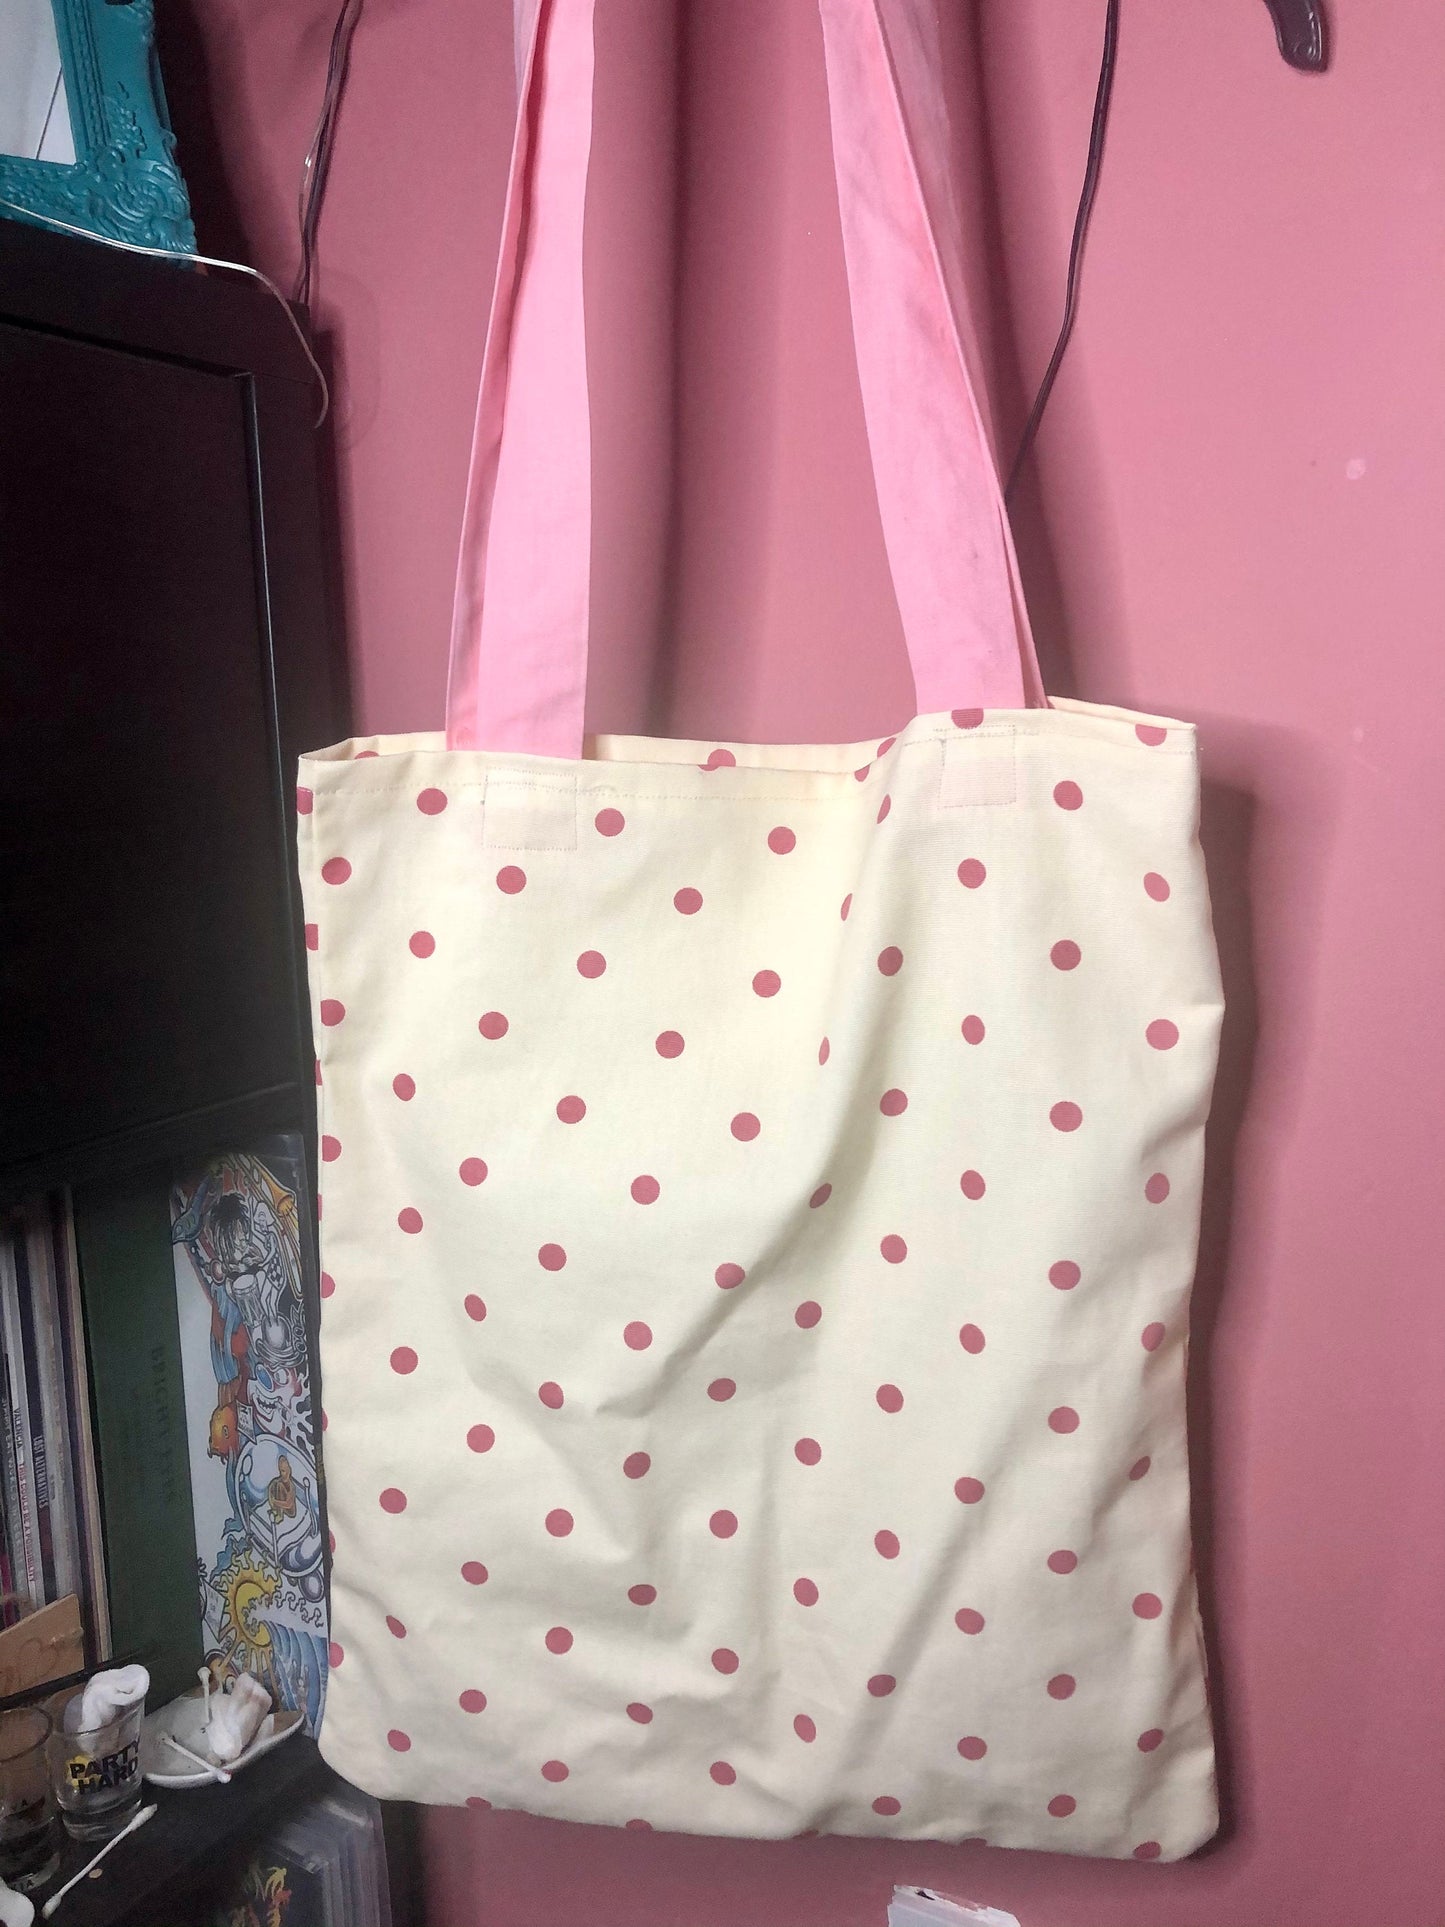 Large canvas Tote Bag, zero waste accessory, gifts for women, pink polka dot on cream, 100 percent cotton, Mother’s Day gift from daughter